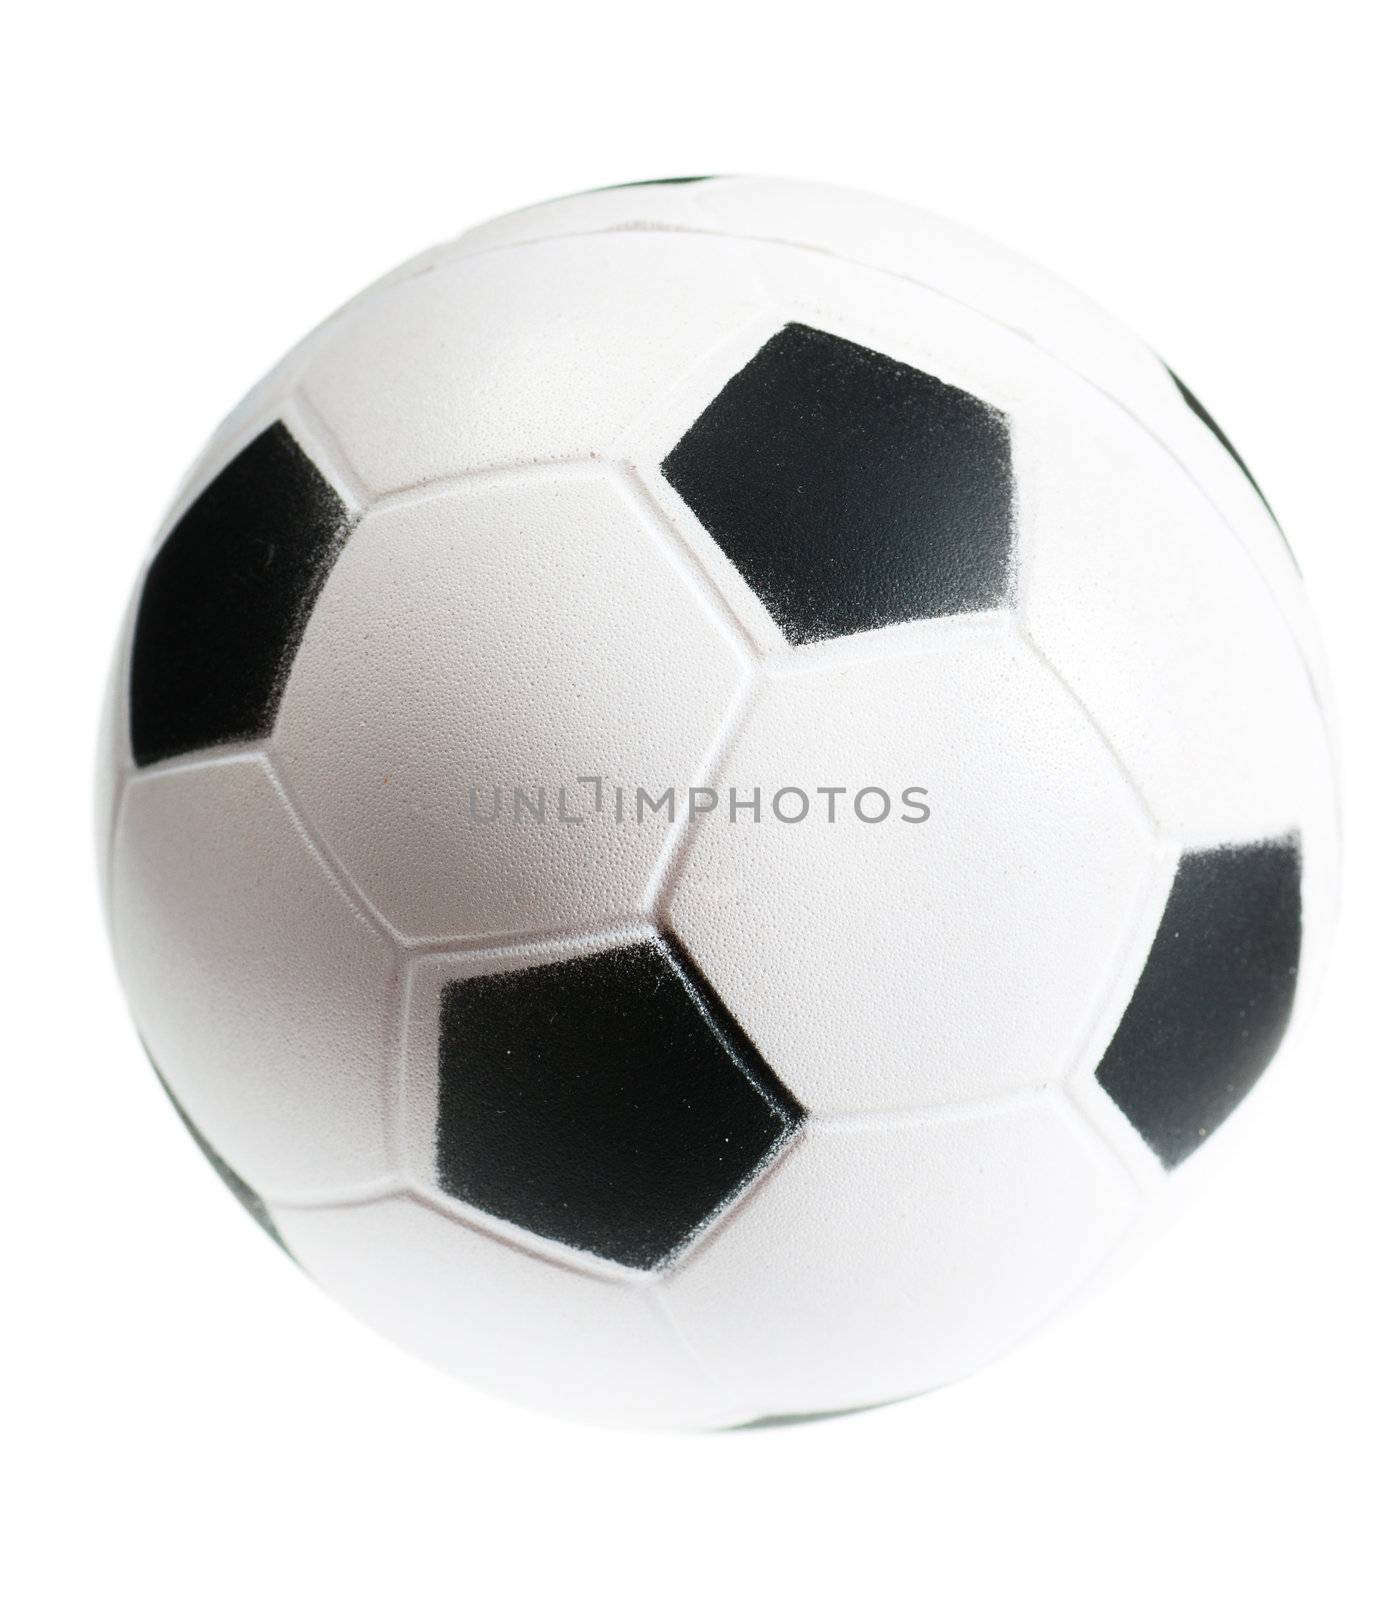 Toy of little soccer ball isolated over white background